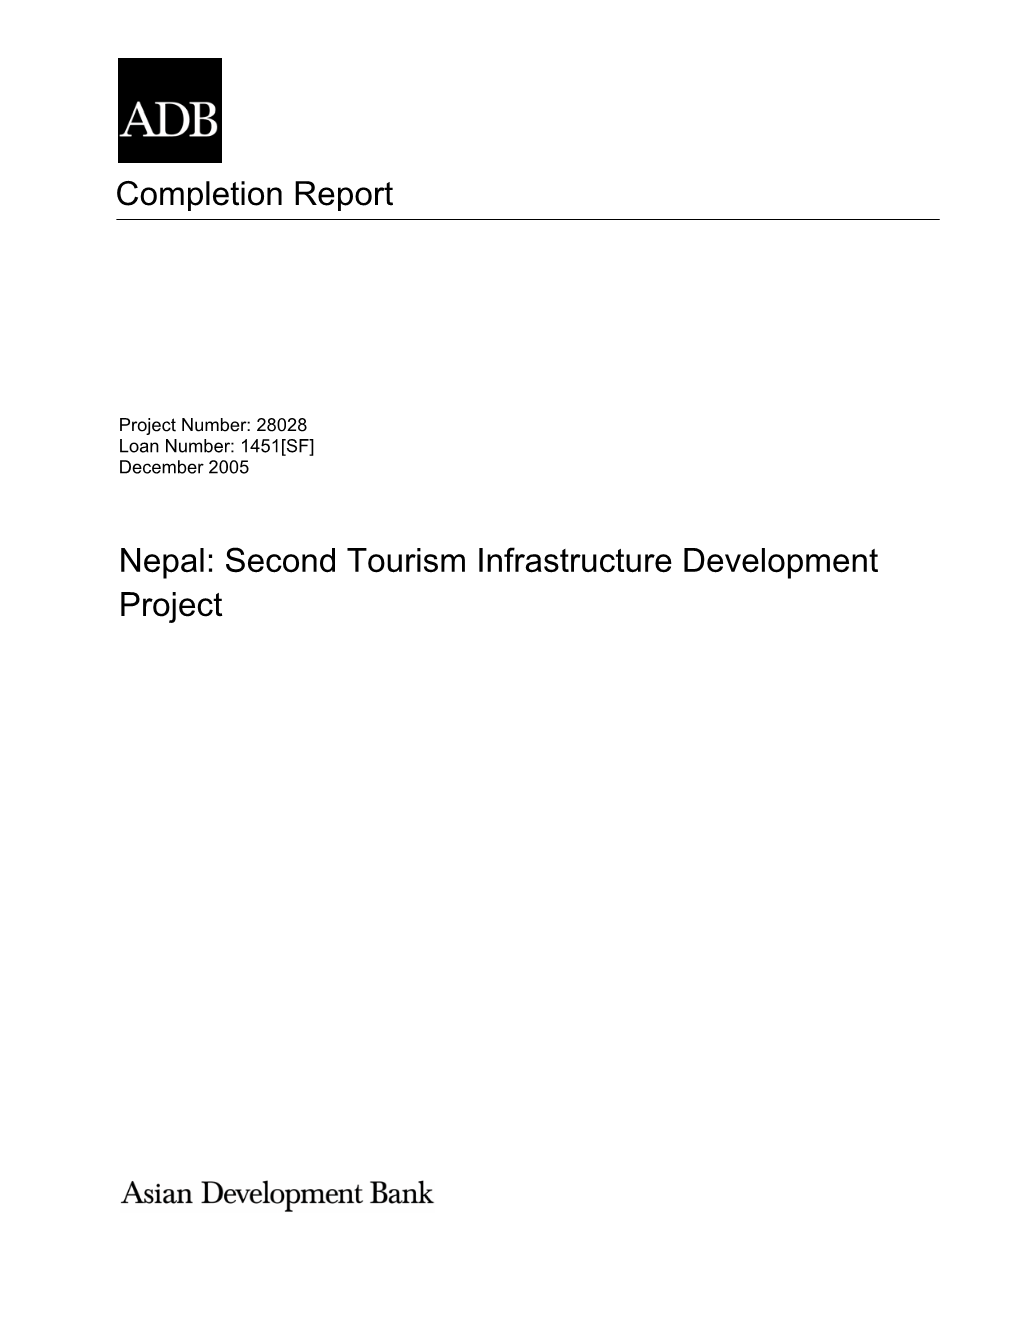 Nepal: Second Tourism Infrastructure Development Project